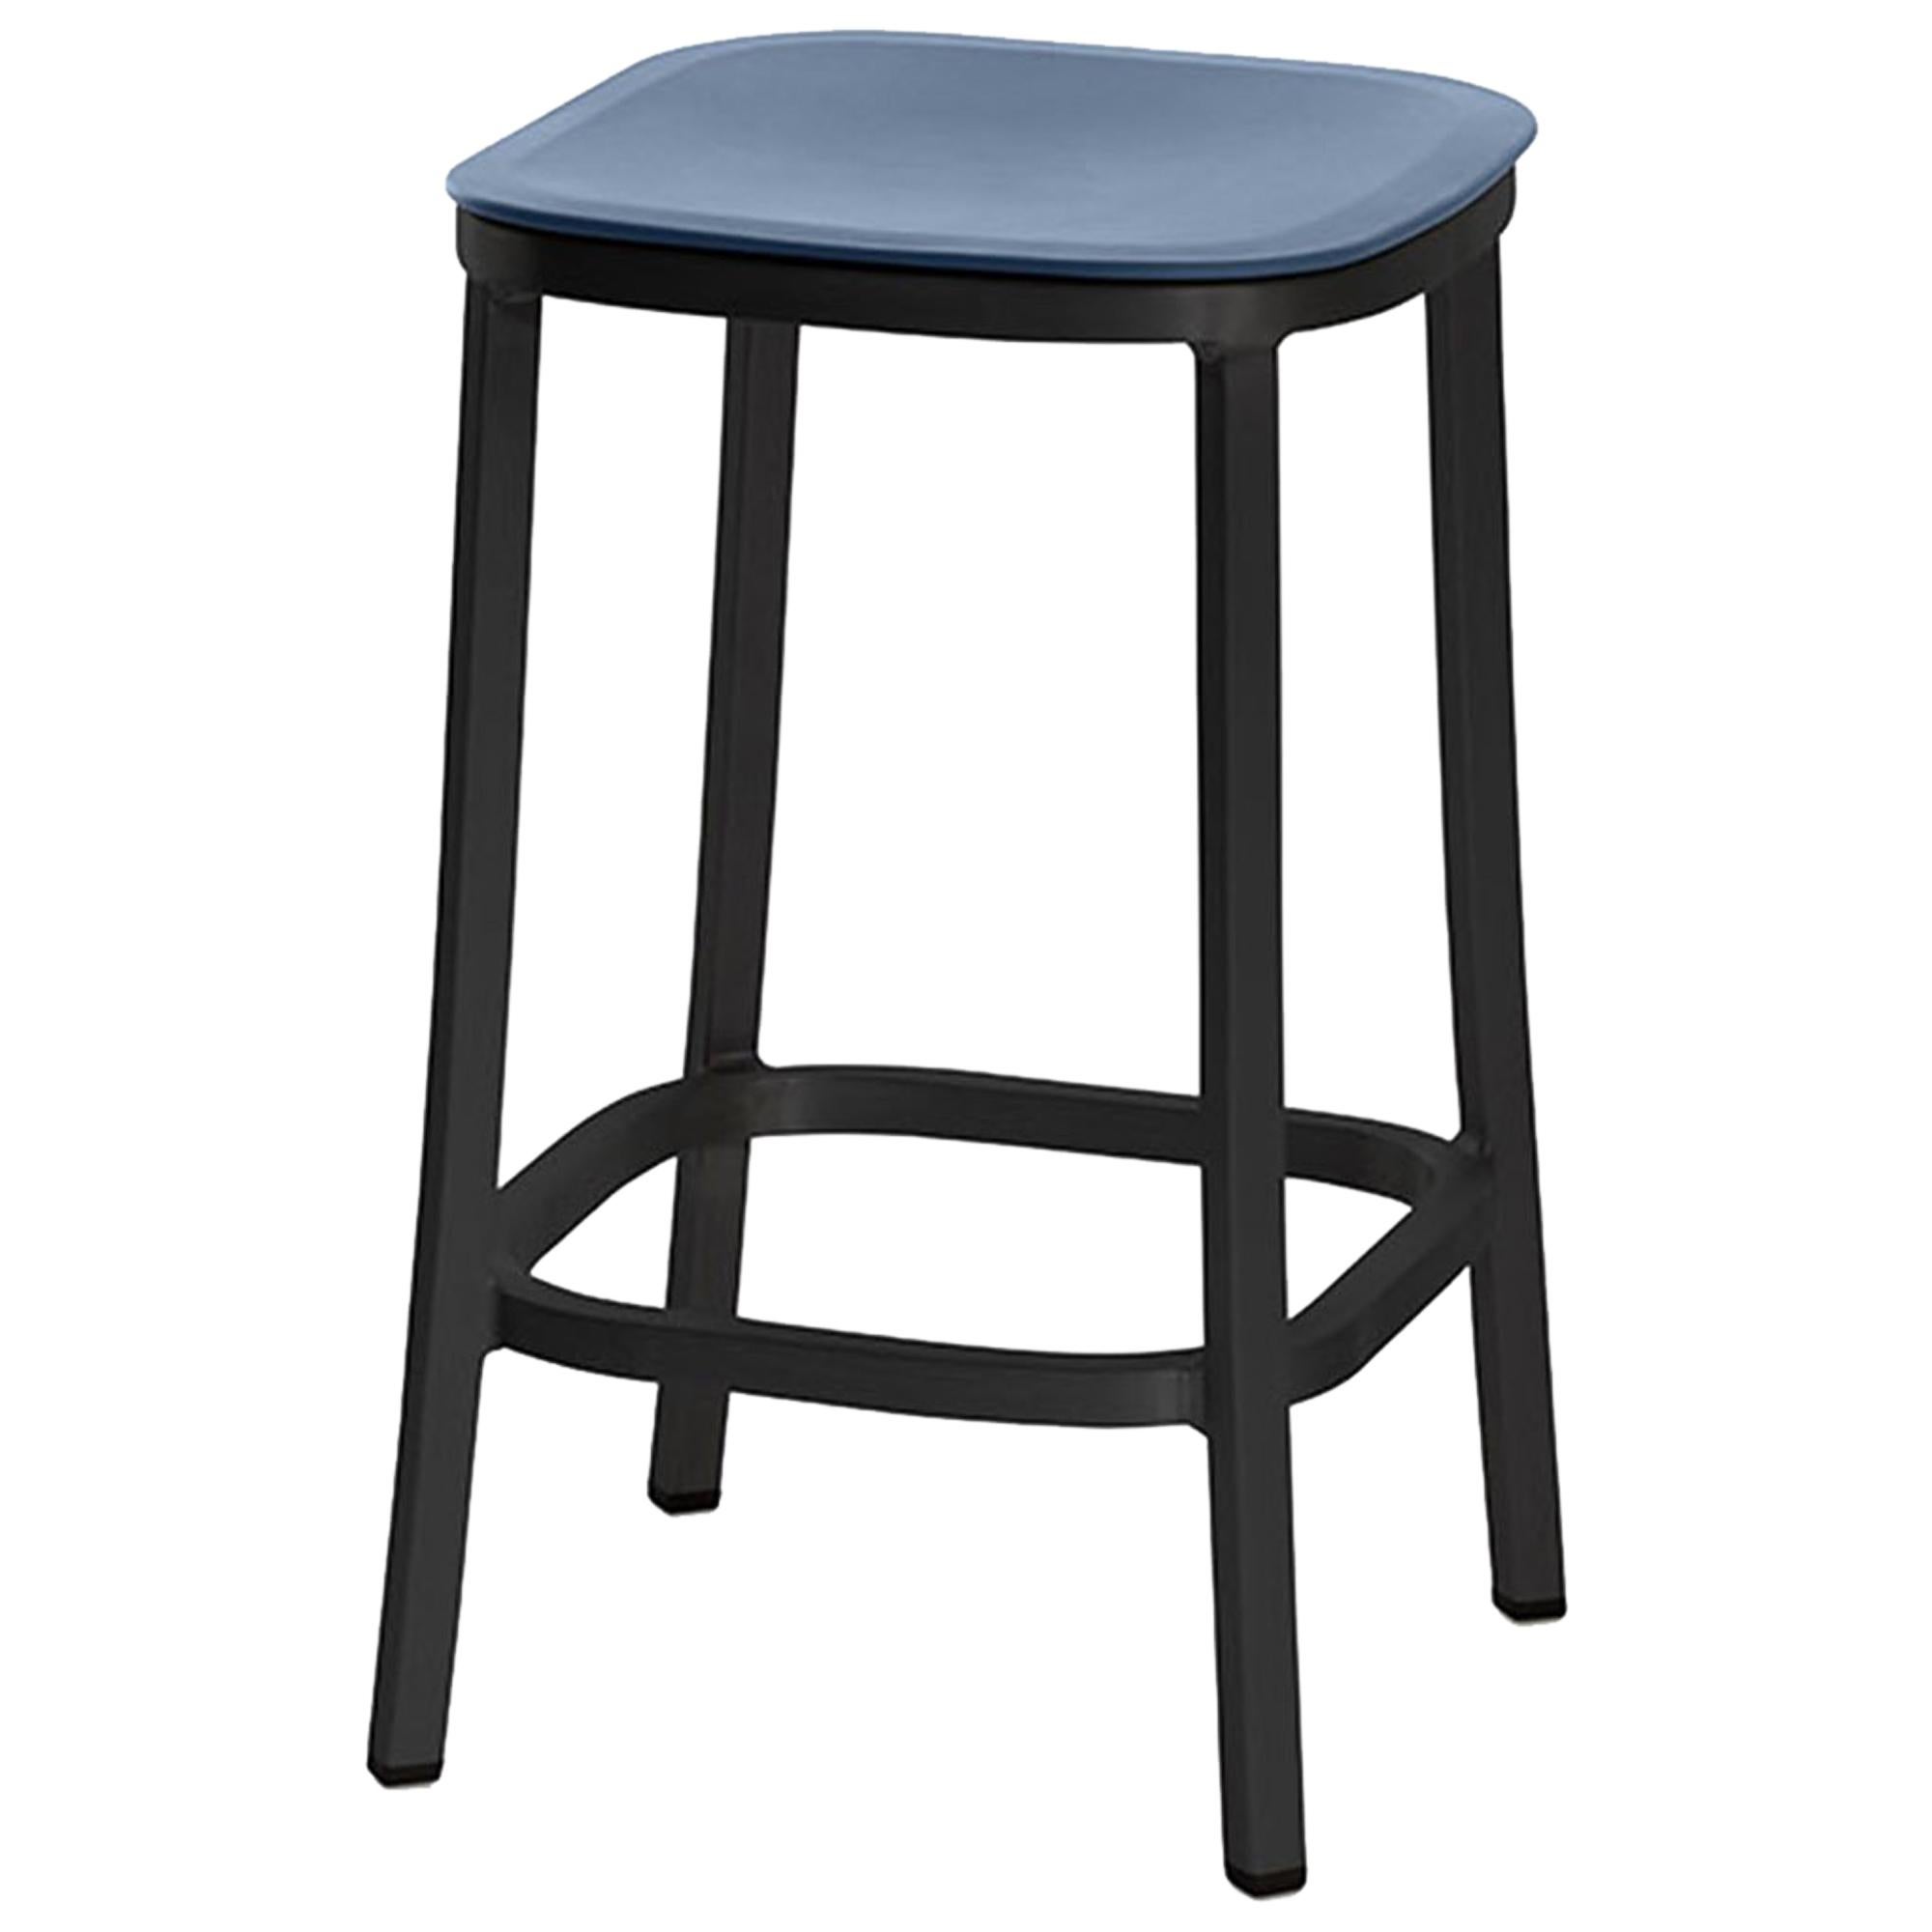 Emeco 1 Inch Counter Stool in Dark Aluminum and Blue by Jasper Morrison For Sale